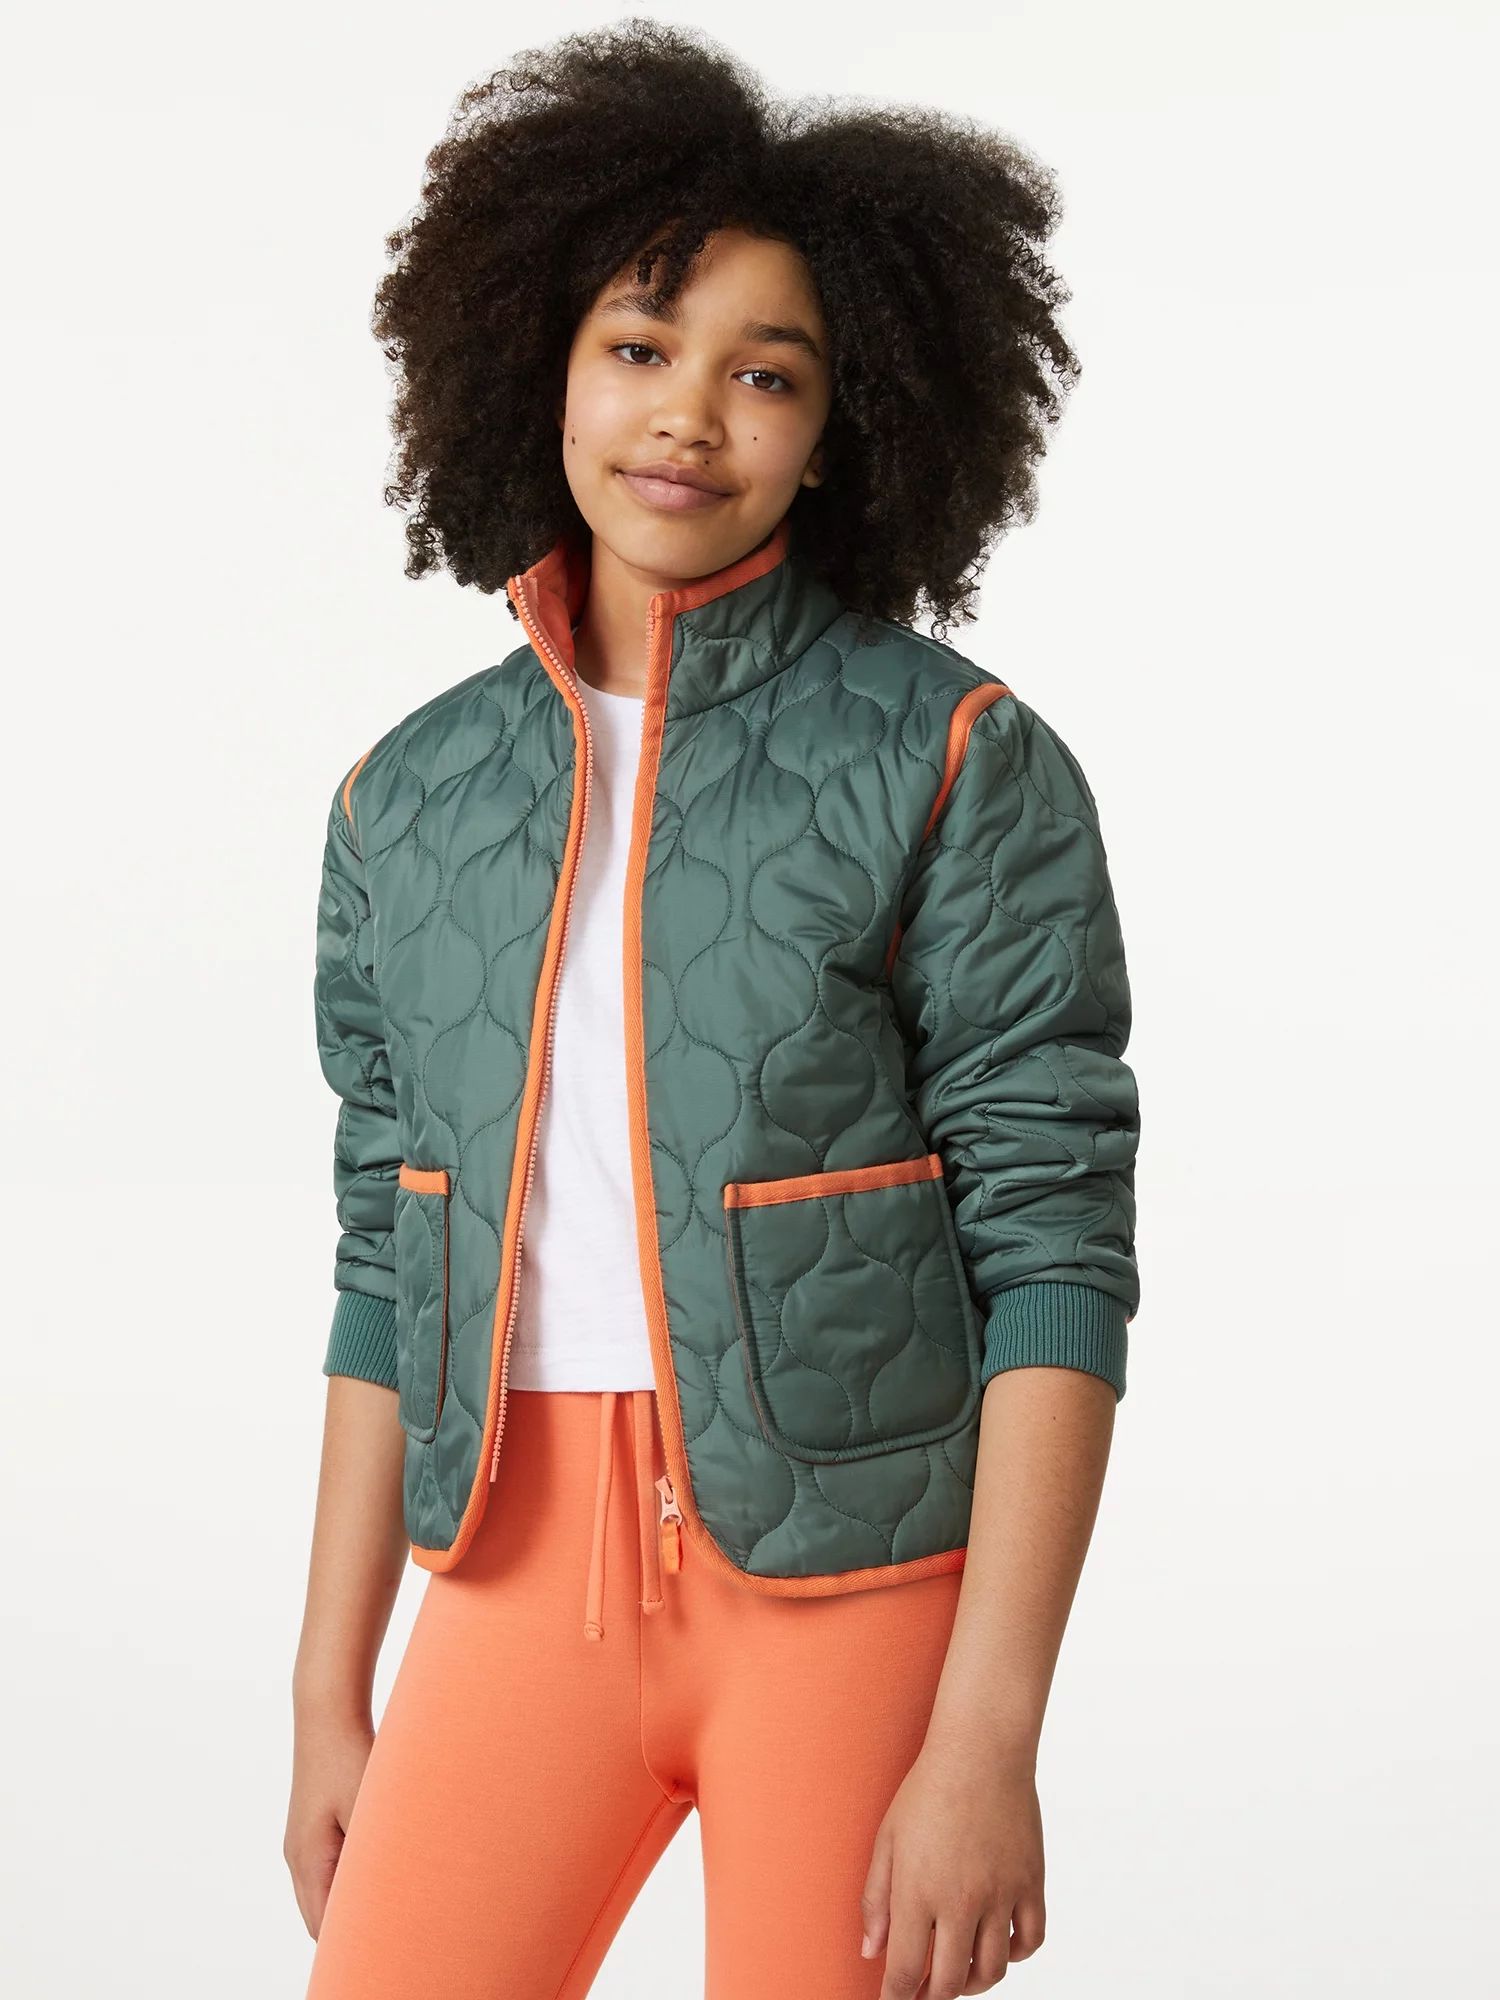 Free Assembly Girls Lightweight Quilted Jacket, Sizes 4-18 | Walmart (US)